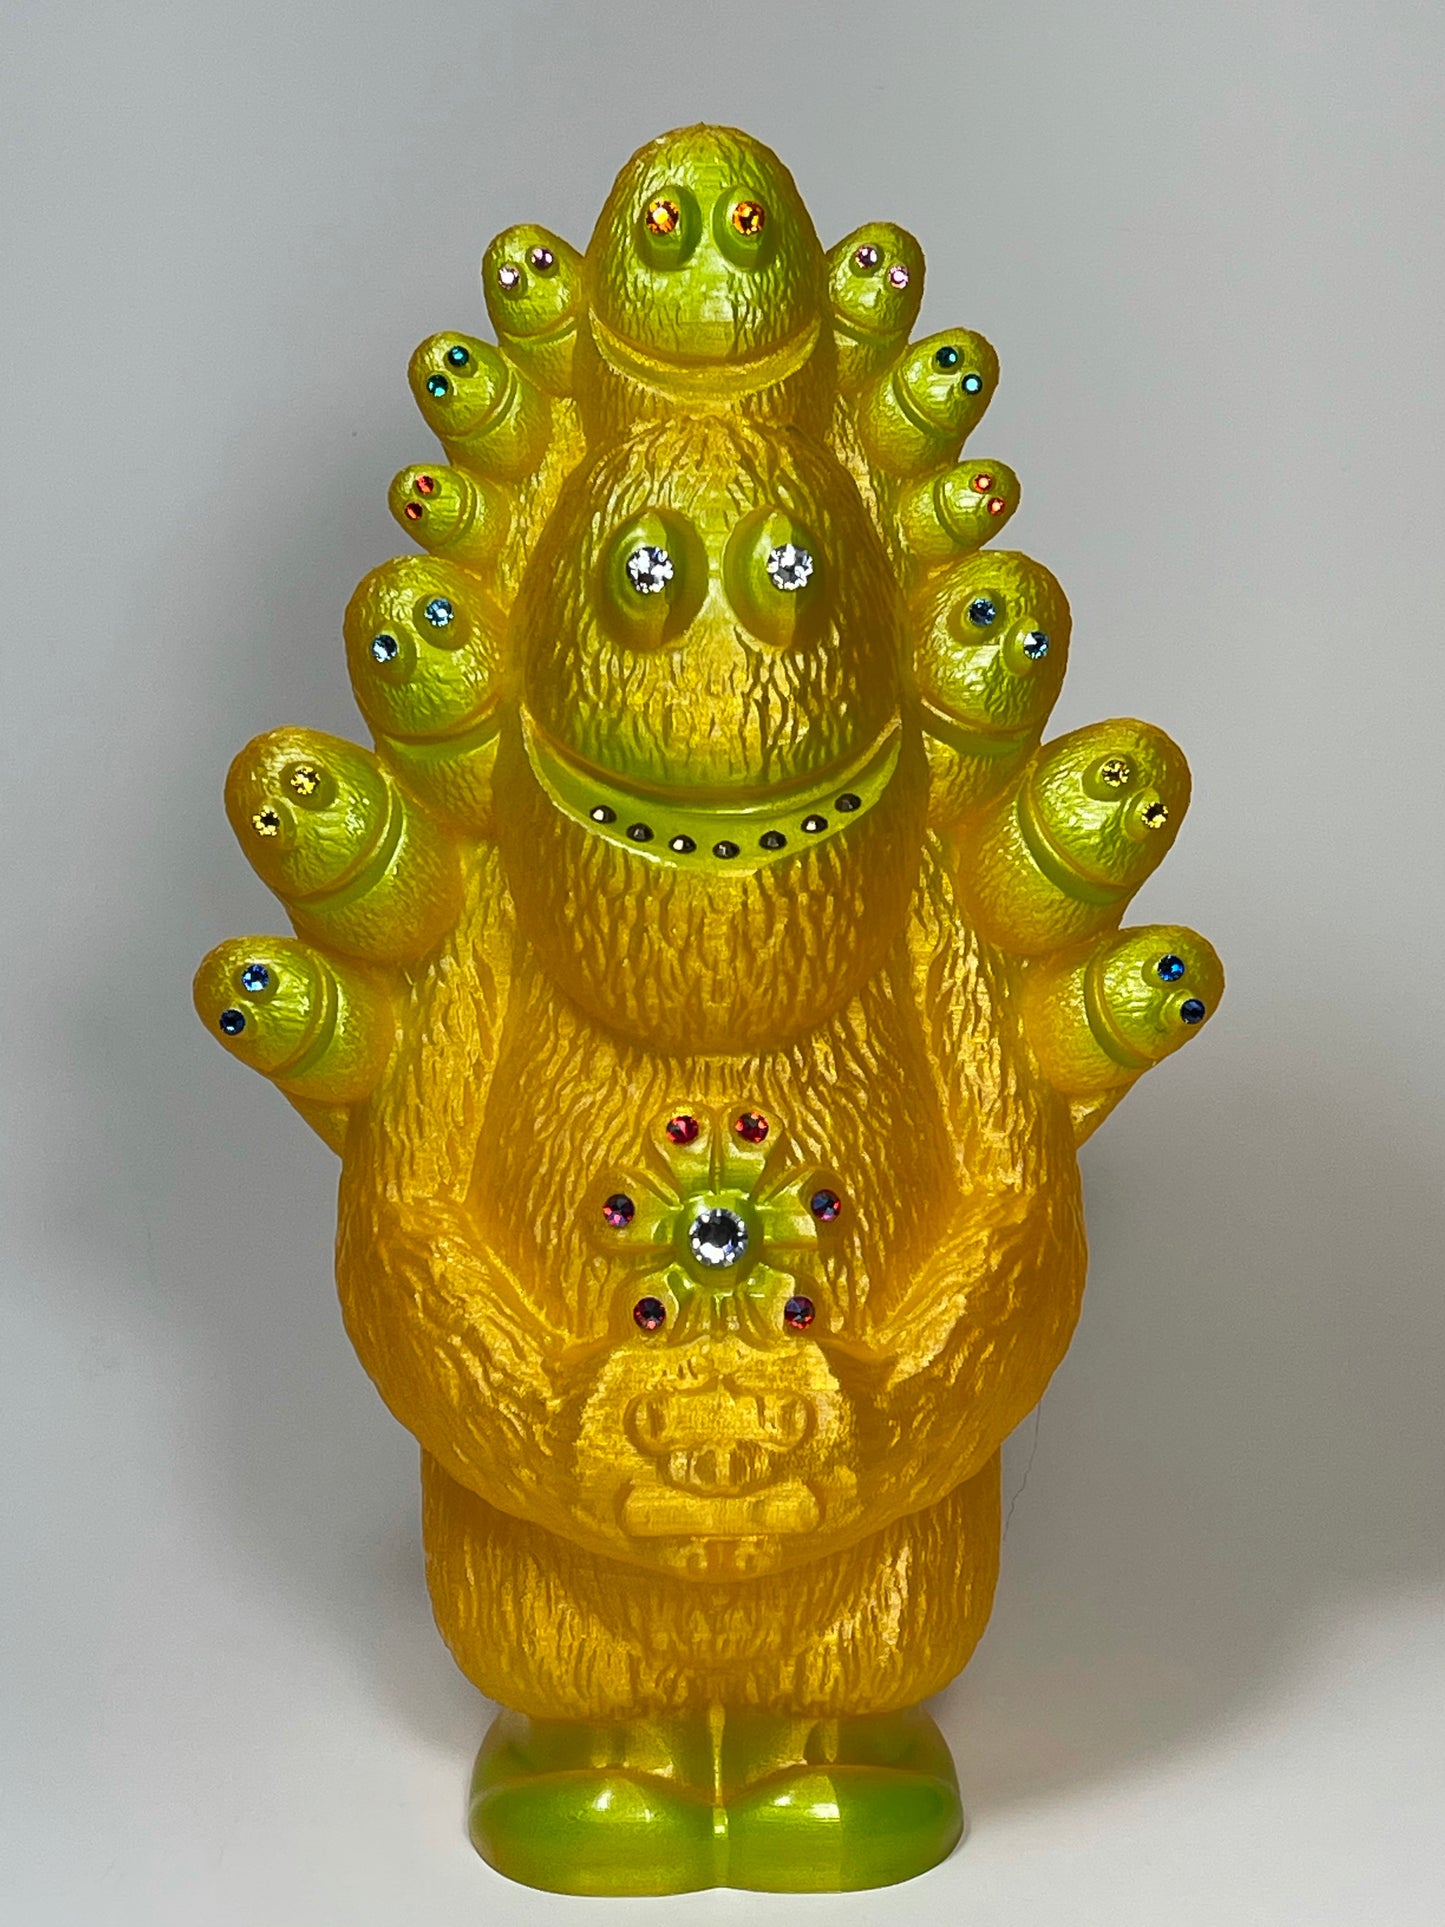 Monster King: The Yellow Barron of Time